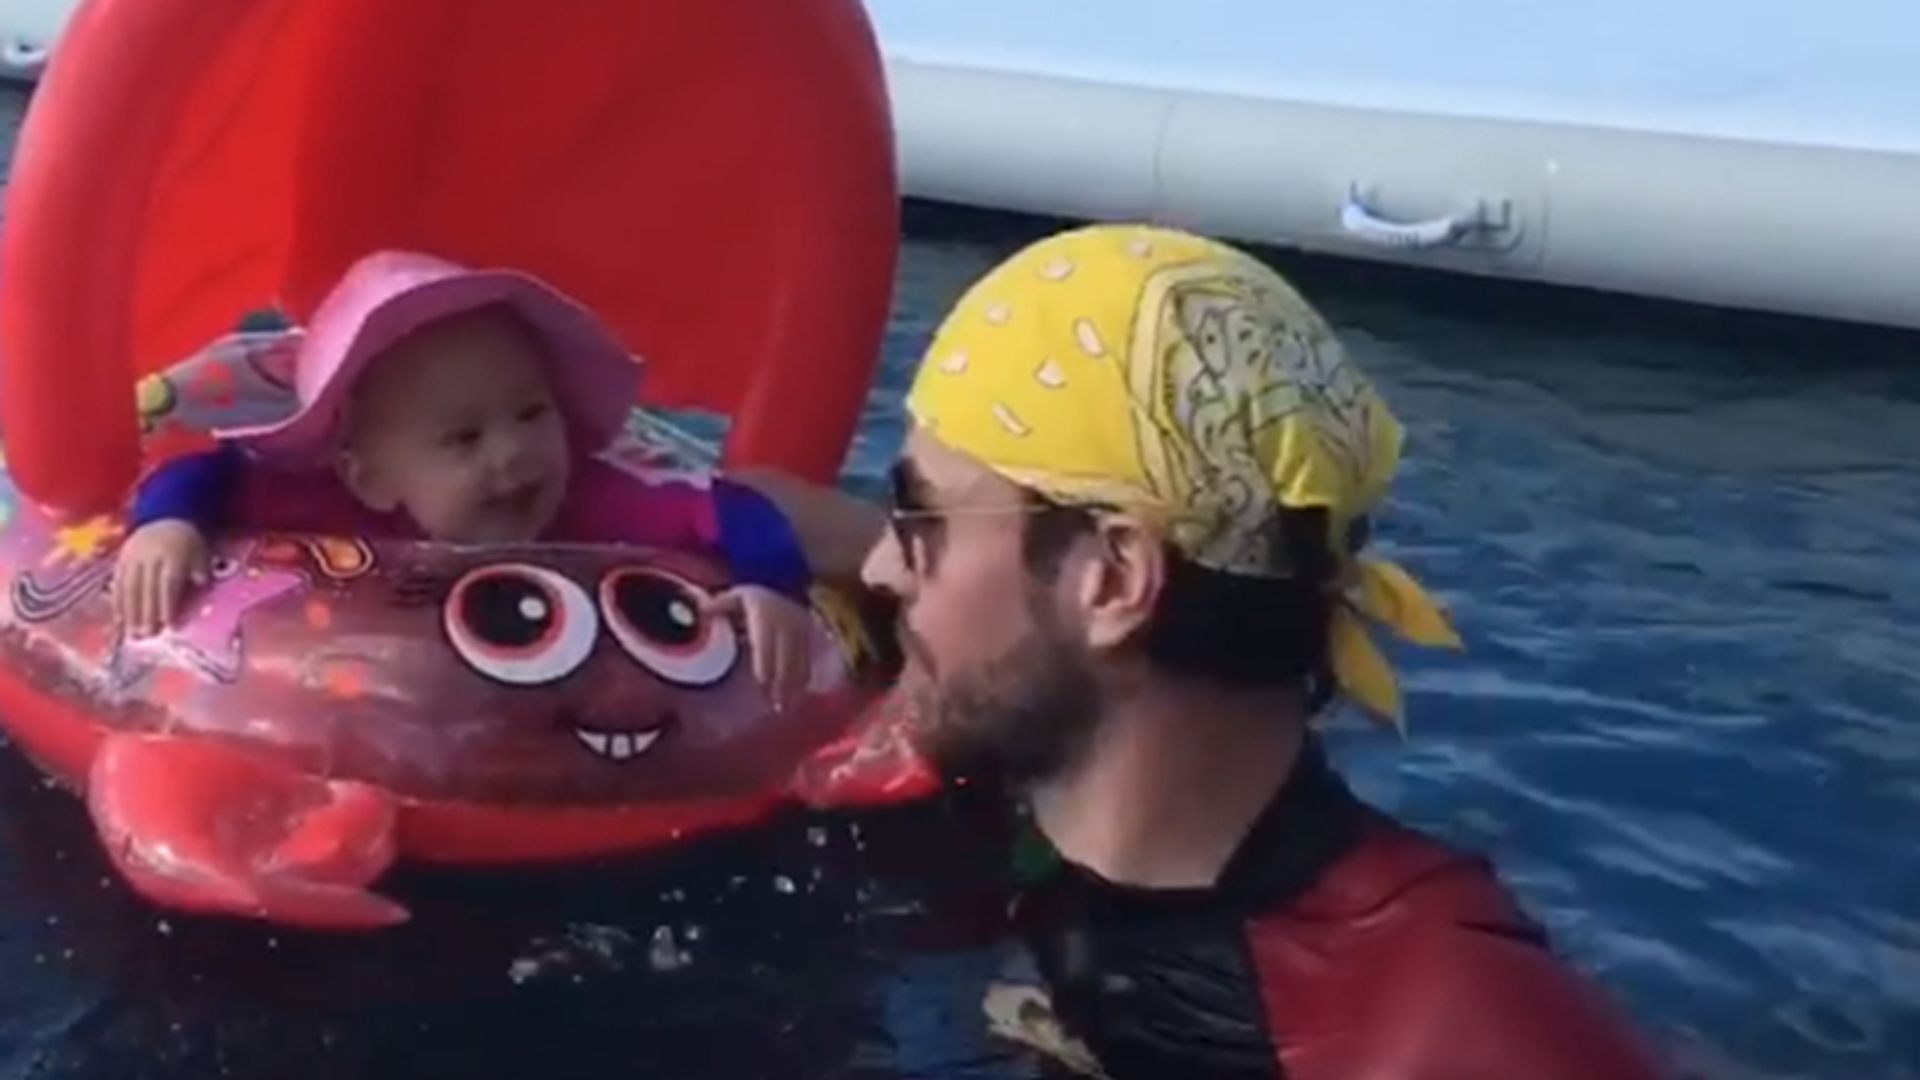 Enrique Iglesias doing a whale impression for his daughter is the cutest – watch video